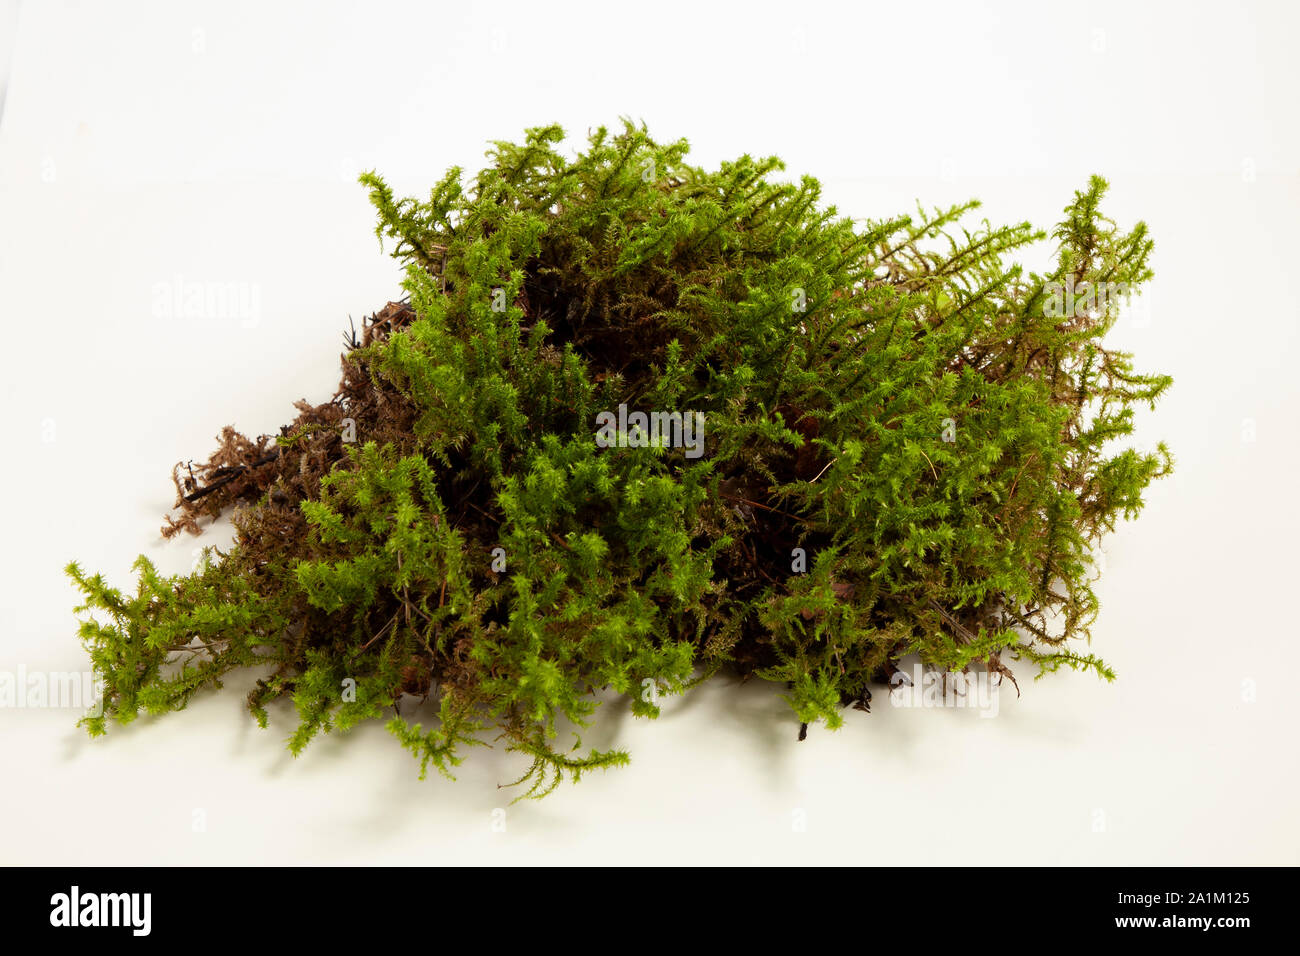 Moss isolated on a white background Stock Photo